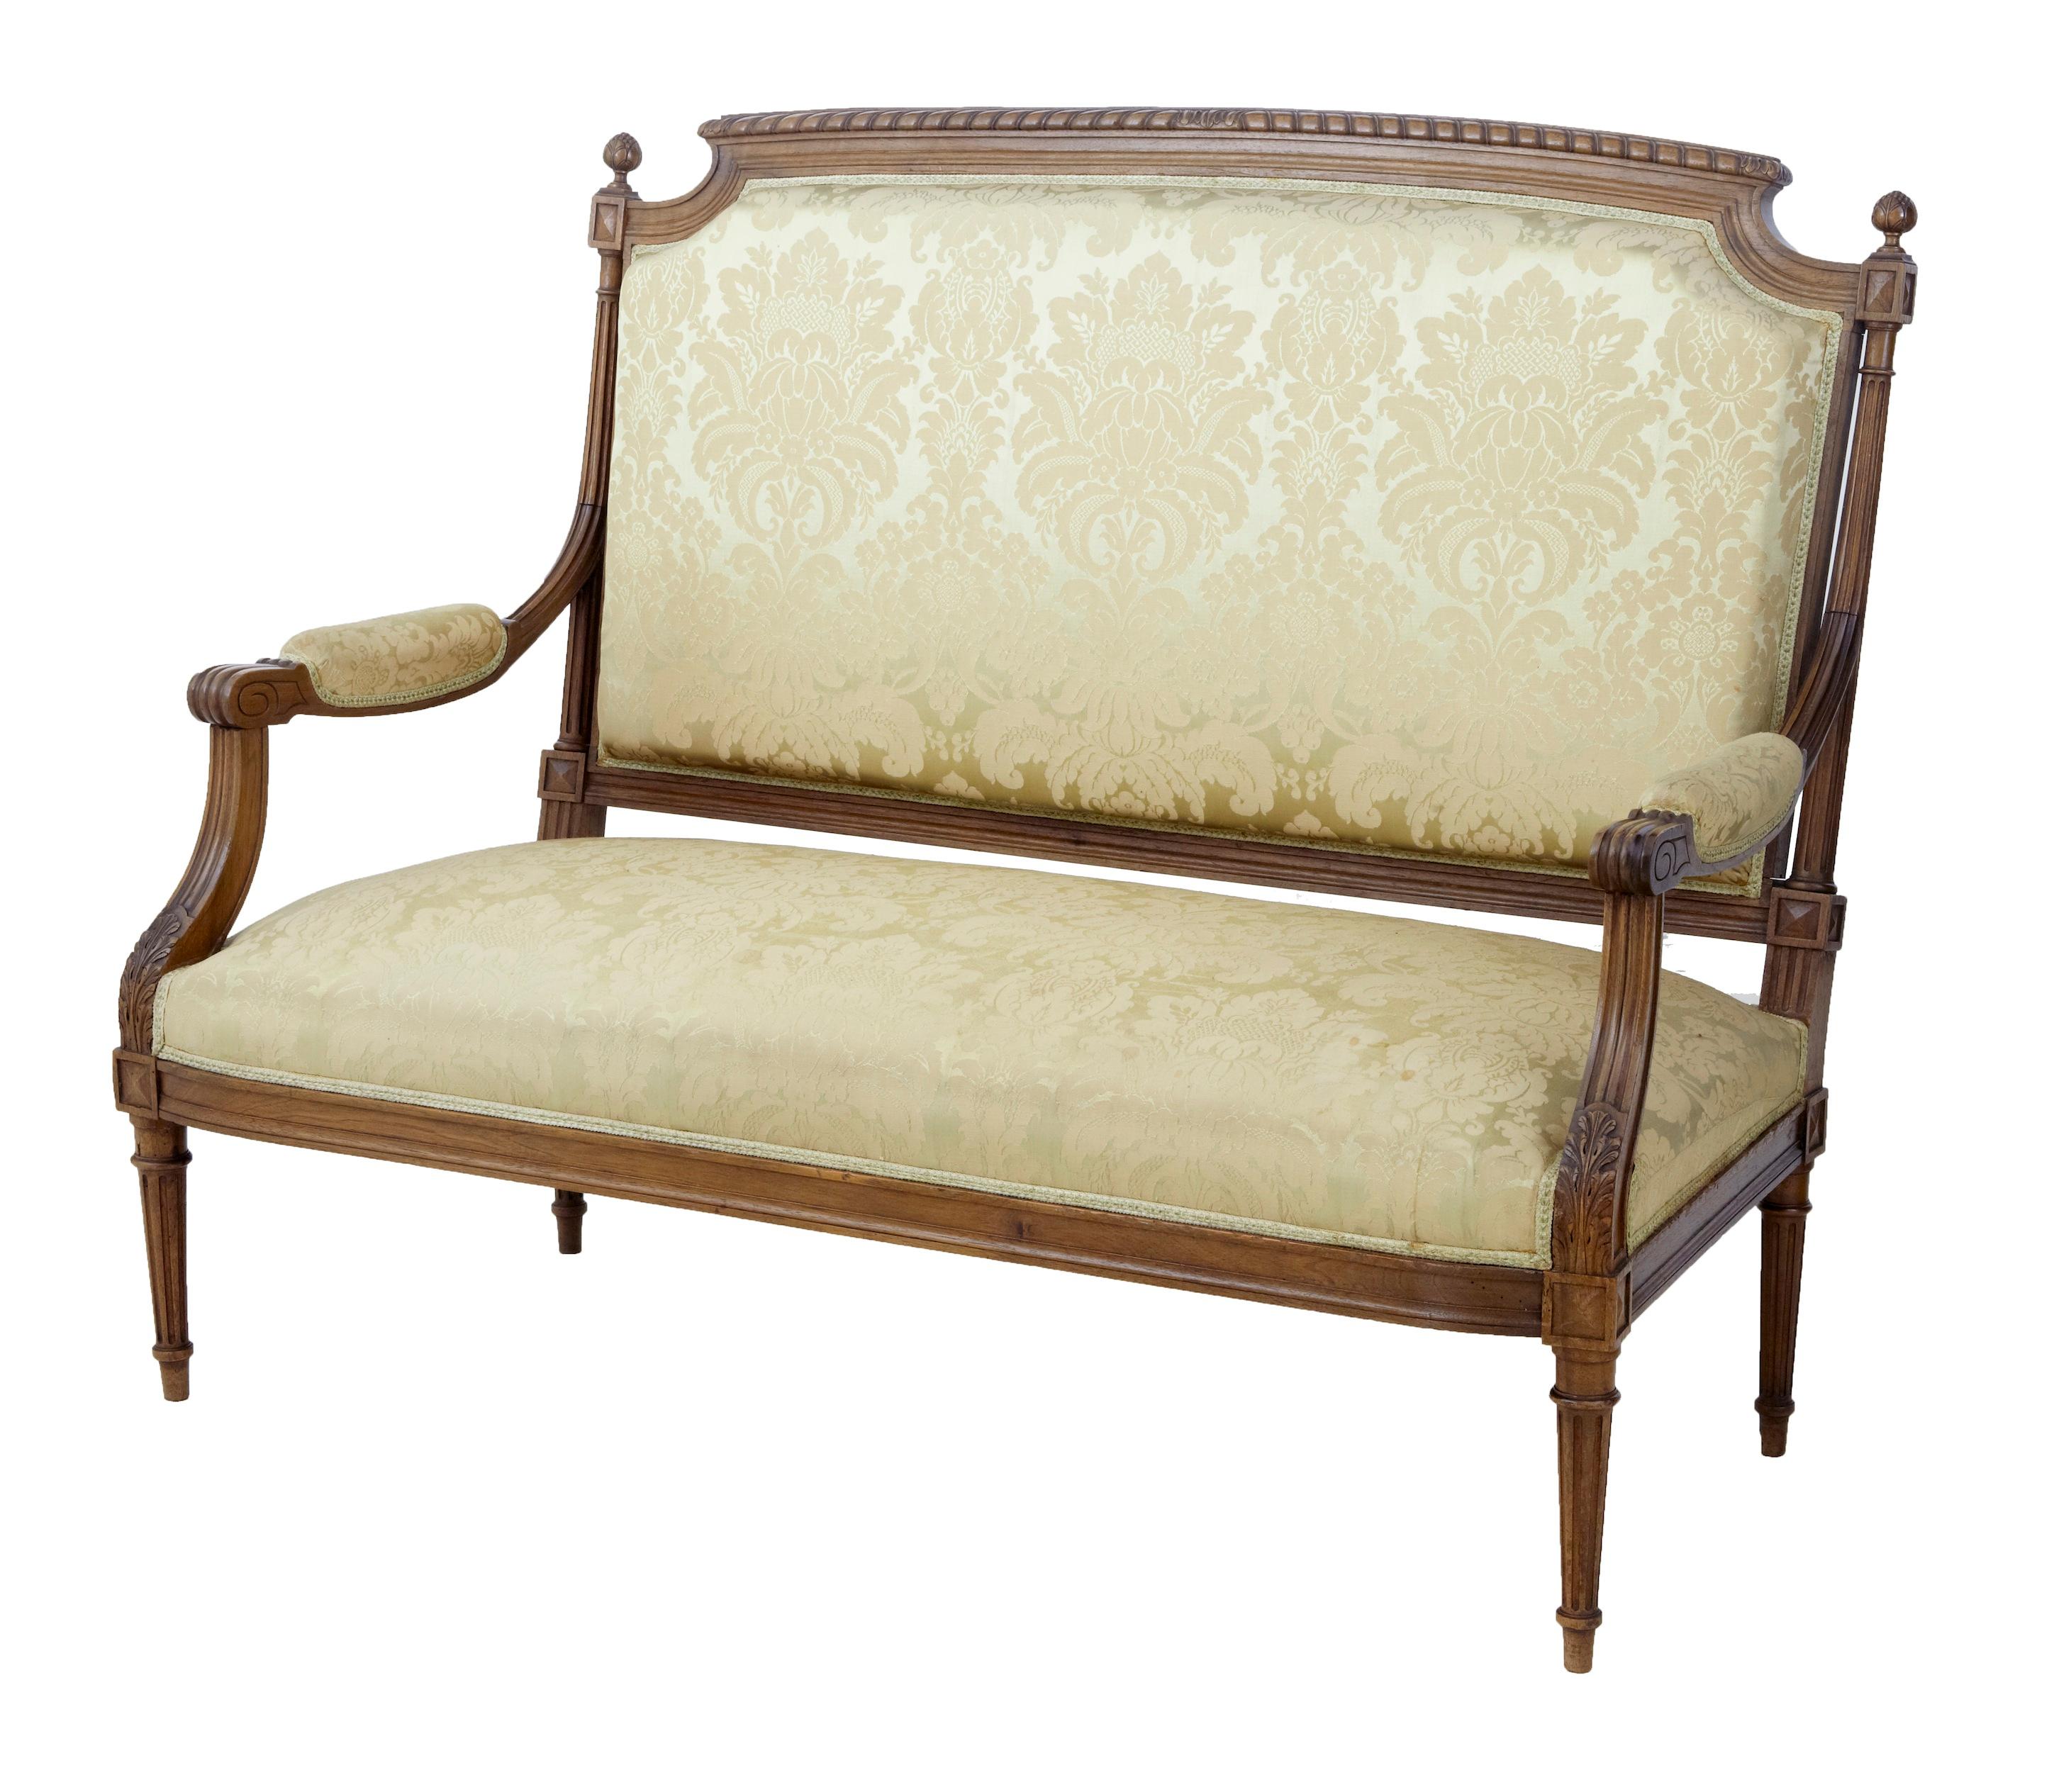 Excellent quality French salon suite, circa 1890.
Set comprises of two armchairs, sofa and two single chairs.
Gadrooned carved back with carved finial detailing. Scrolled arms with acanthus leaf detailing. Standing on fluted legs.
Some light